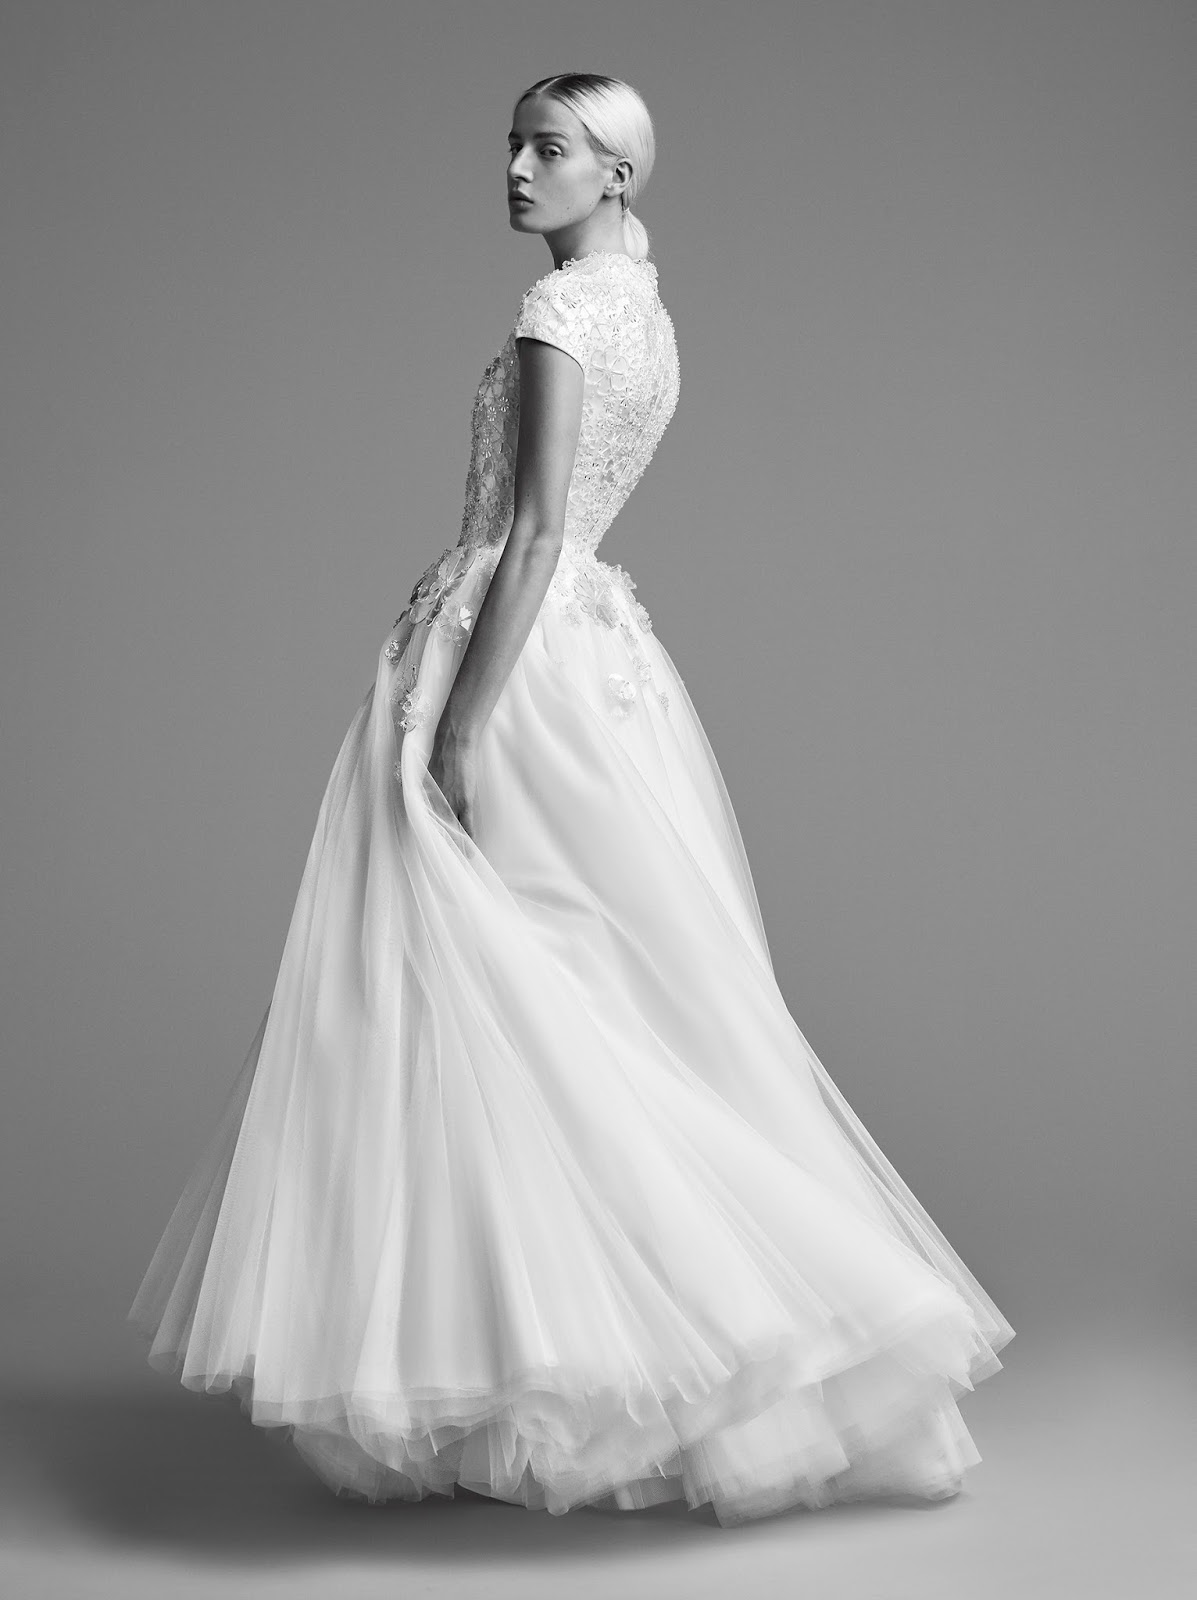 Simply Exquisite Bridal Collection: Viktor and Rolf